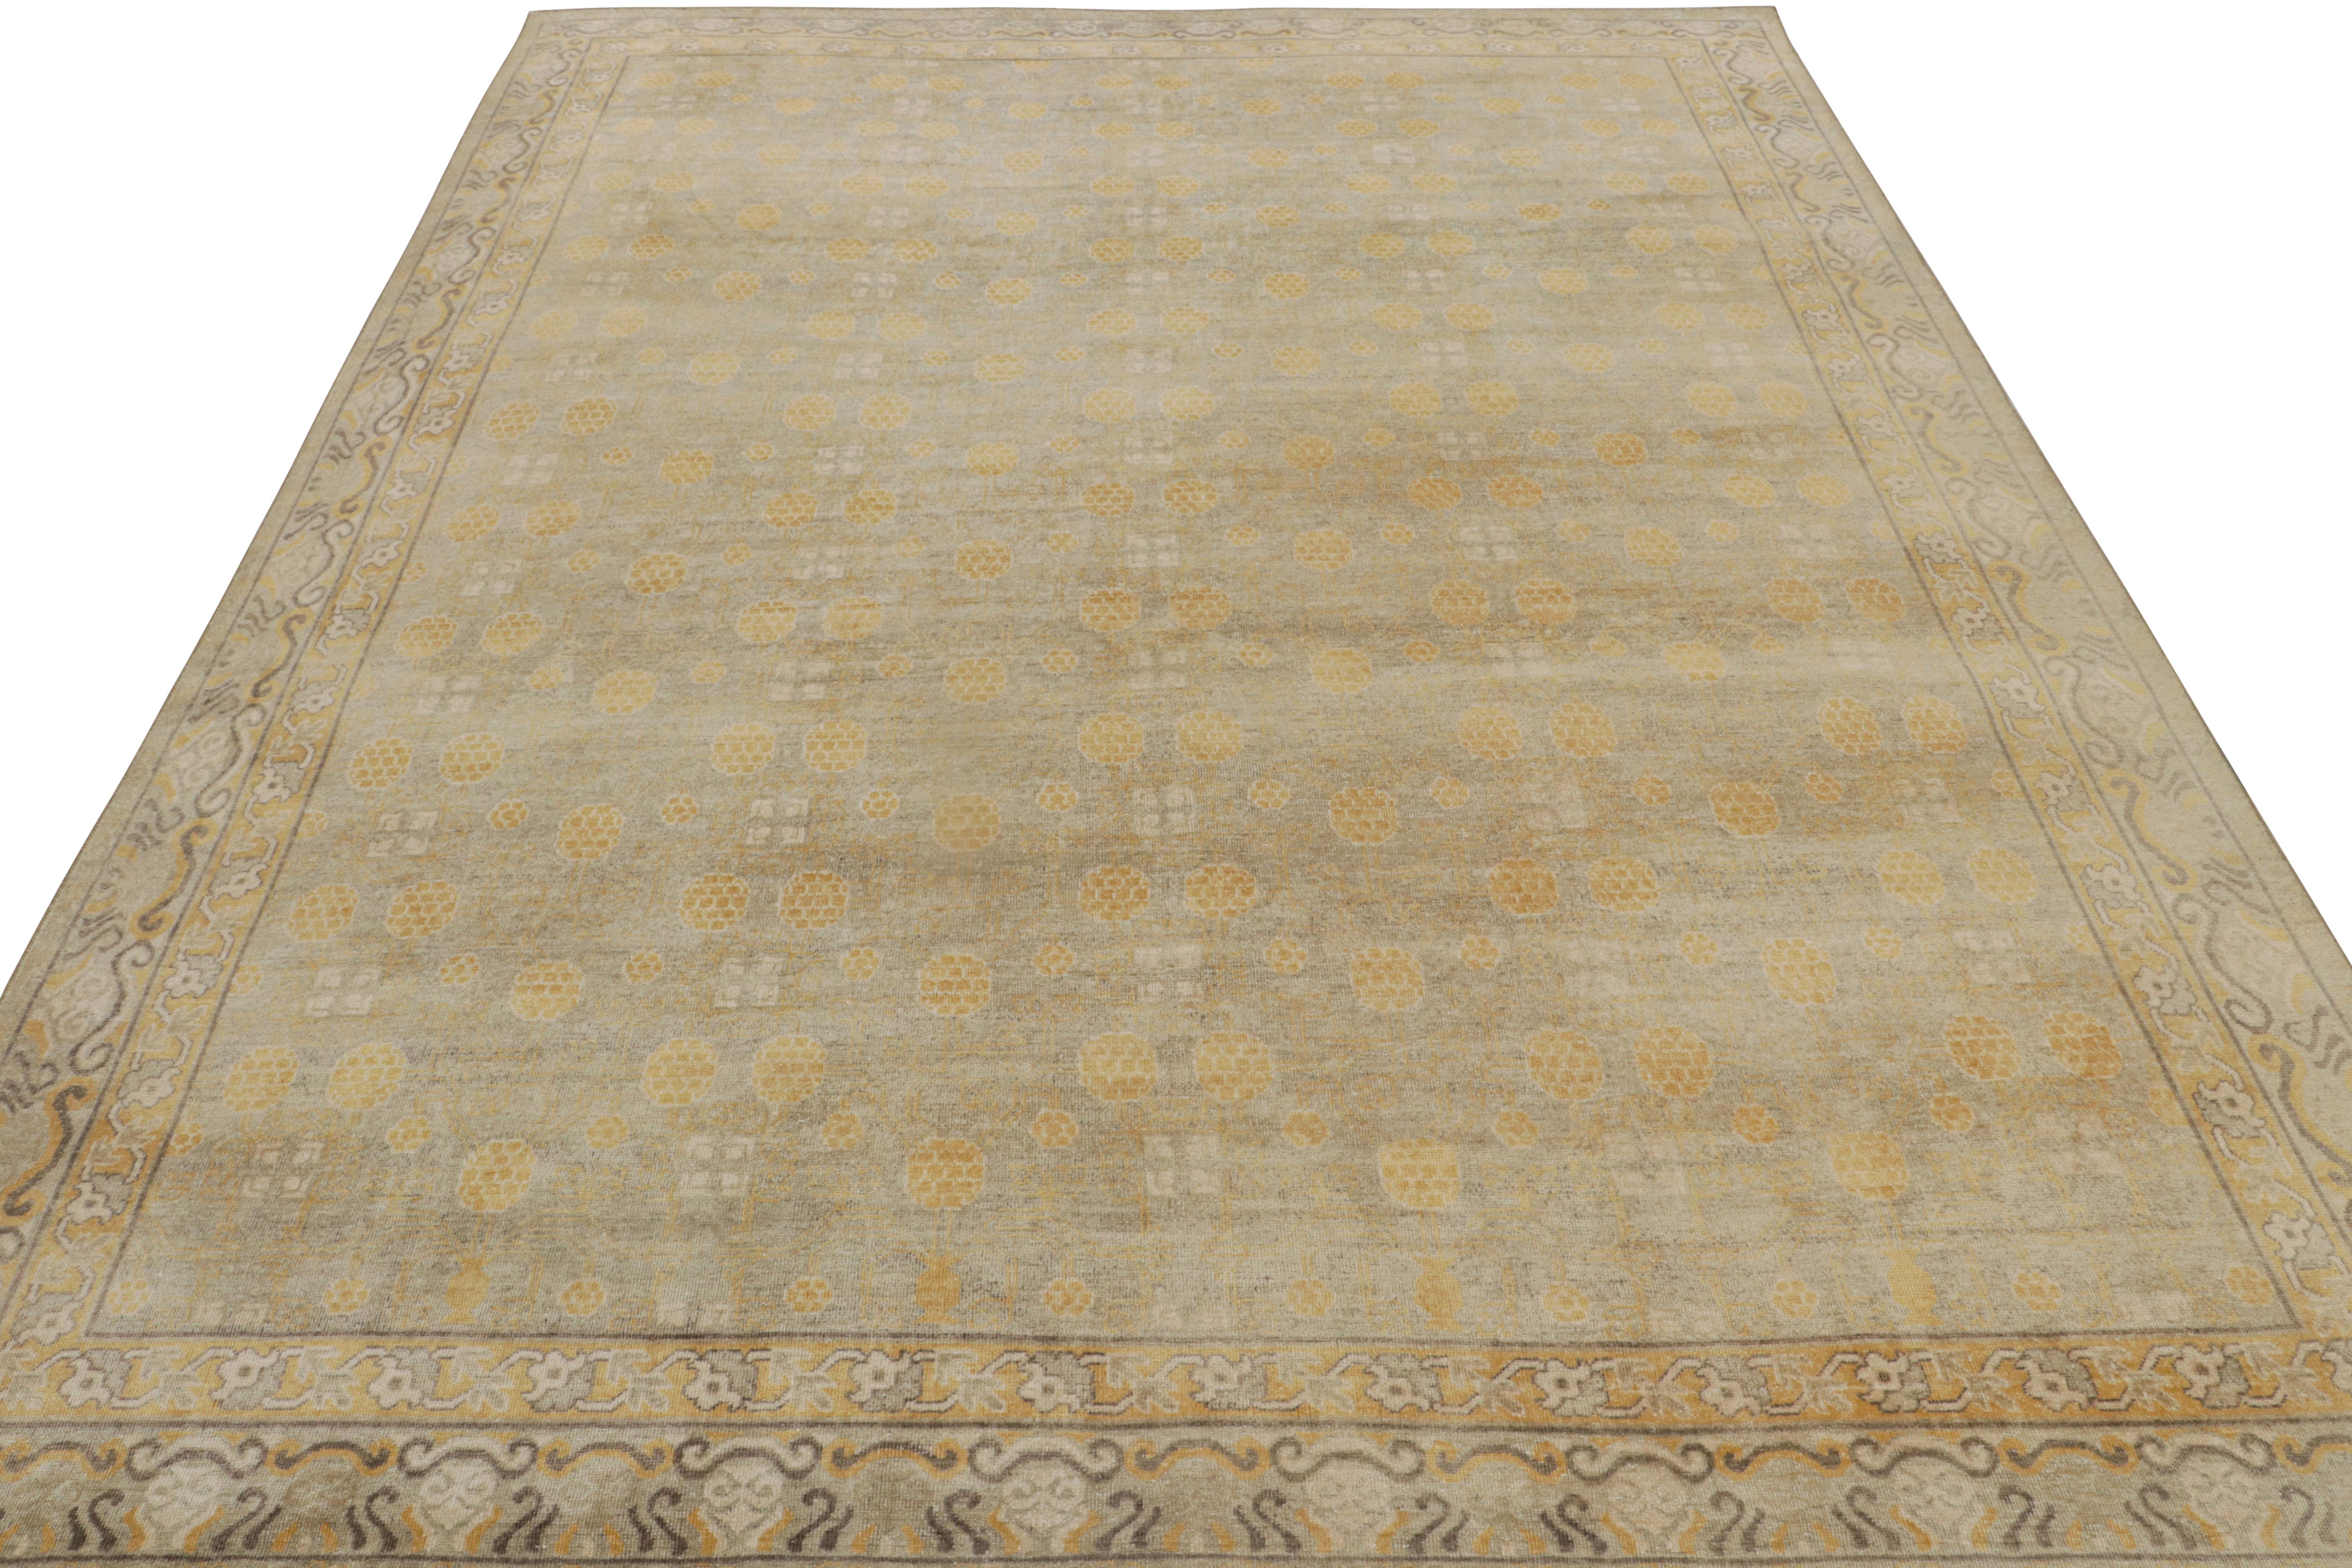 Indian Rug & Kilim’s Khotan Samarkand Style Rug with Florals and Cloudband Borders For Sale